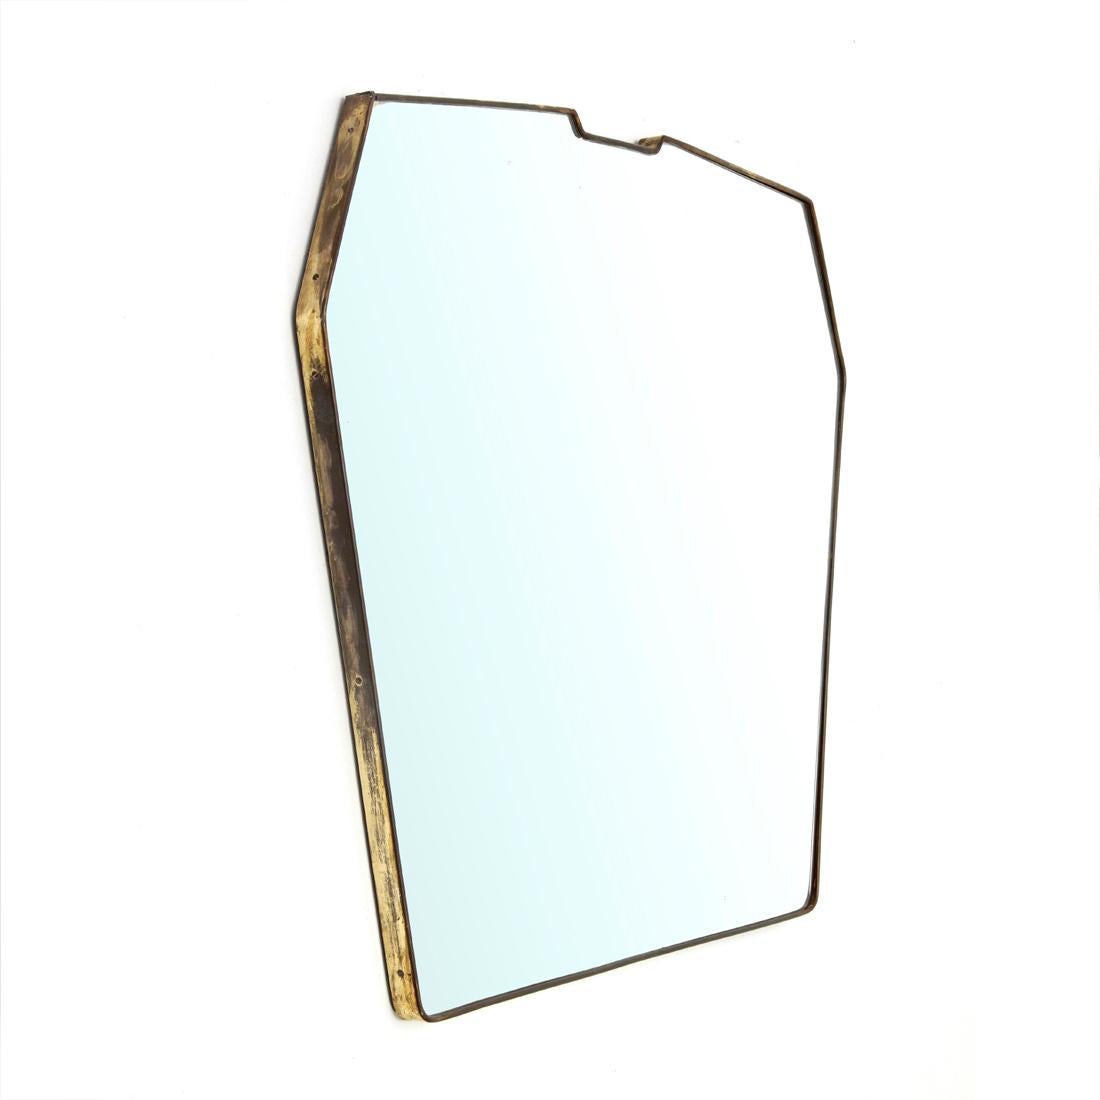 Italian manufacturing mirror made in the 1950s.
Polygonal wooden frame with brass frame.
Mirrored glass.
Good general conditions, some signs due to normal use over time, small joint defect in a corner.

Dimensions: Length 116 cm, depth 3 cm,